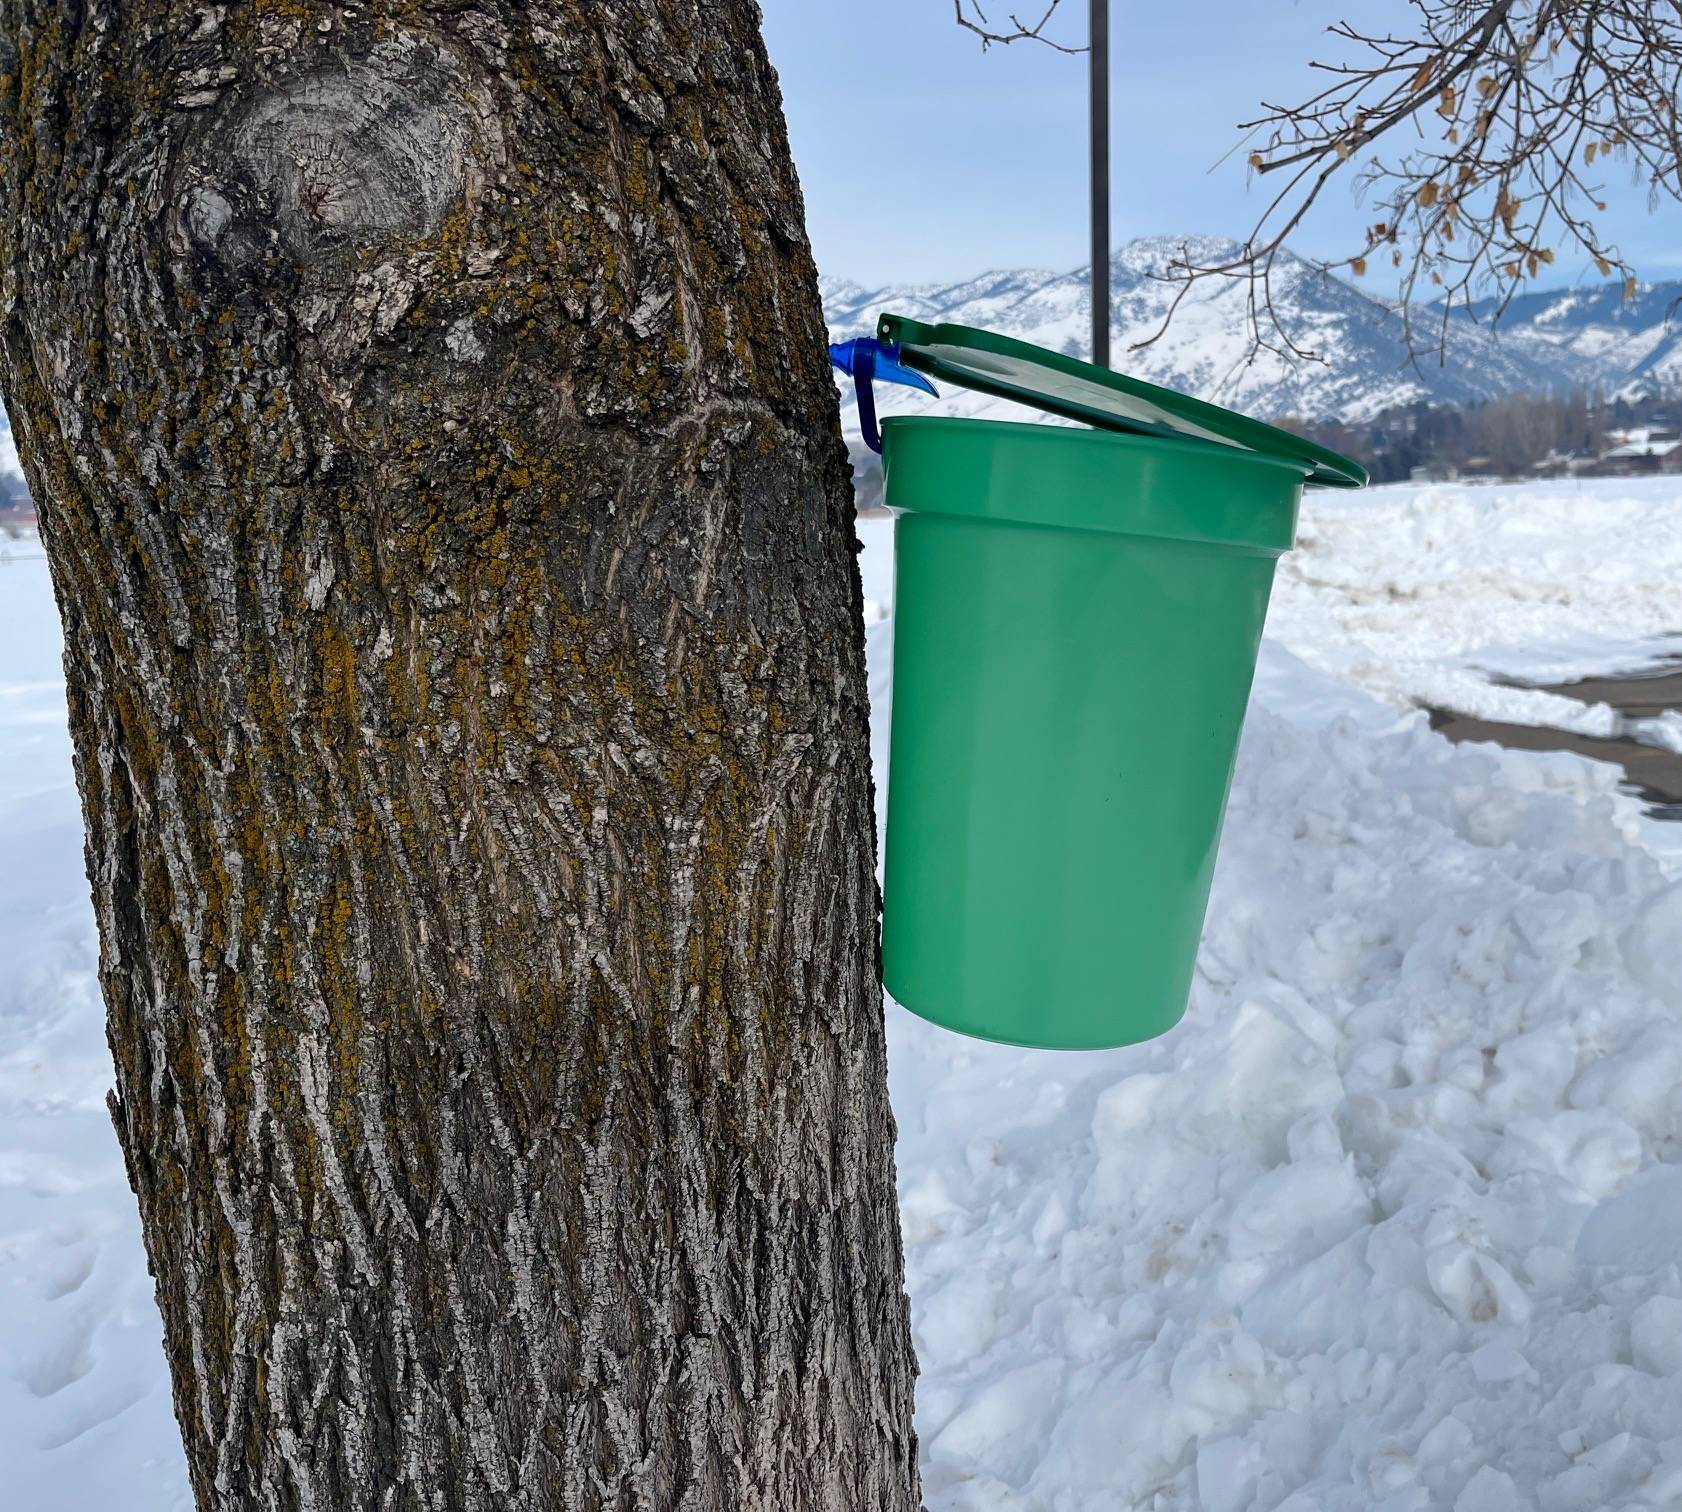 A green bucket hanging off a maple tree.